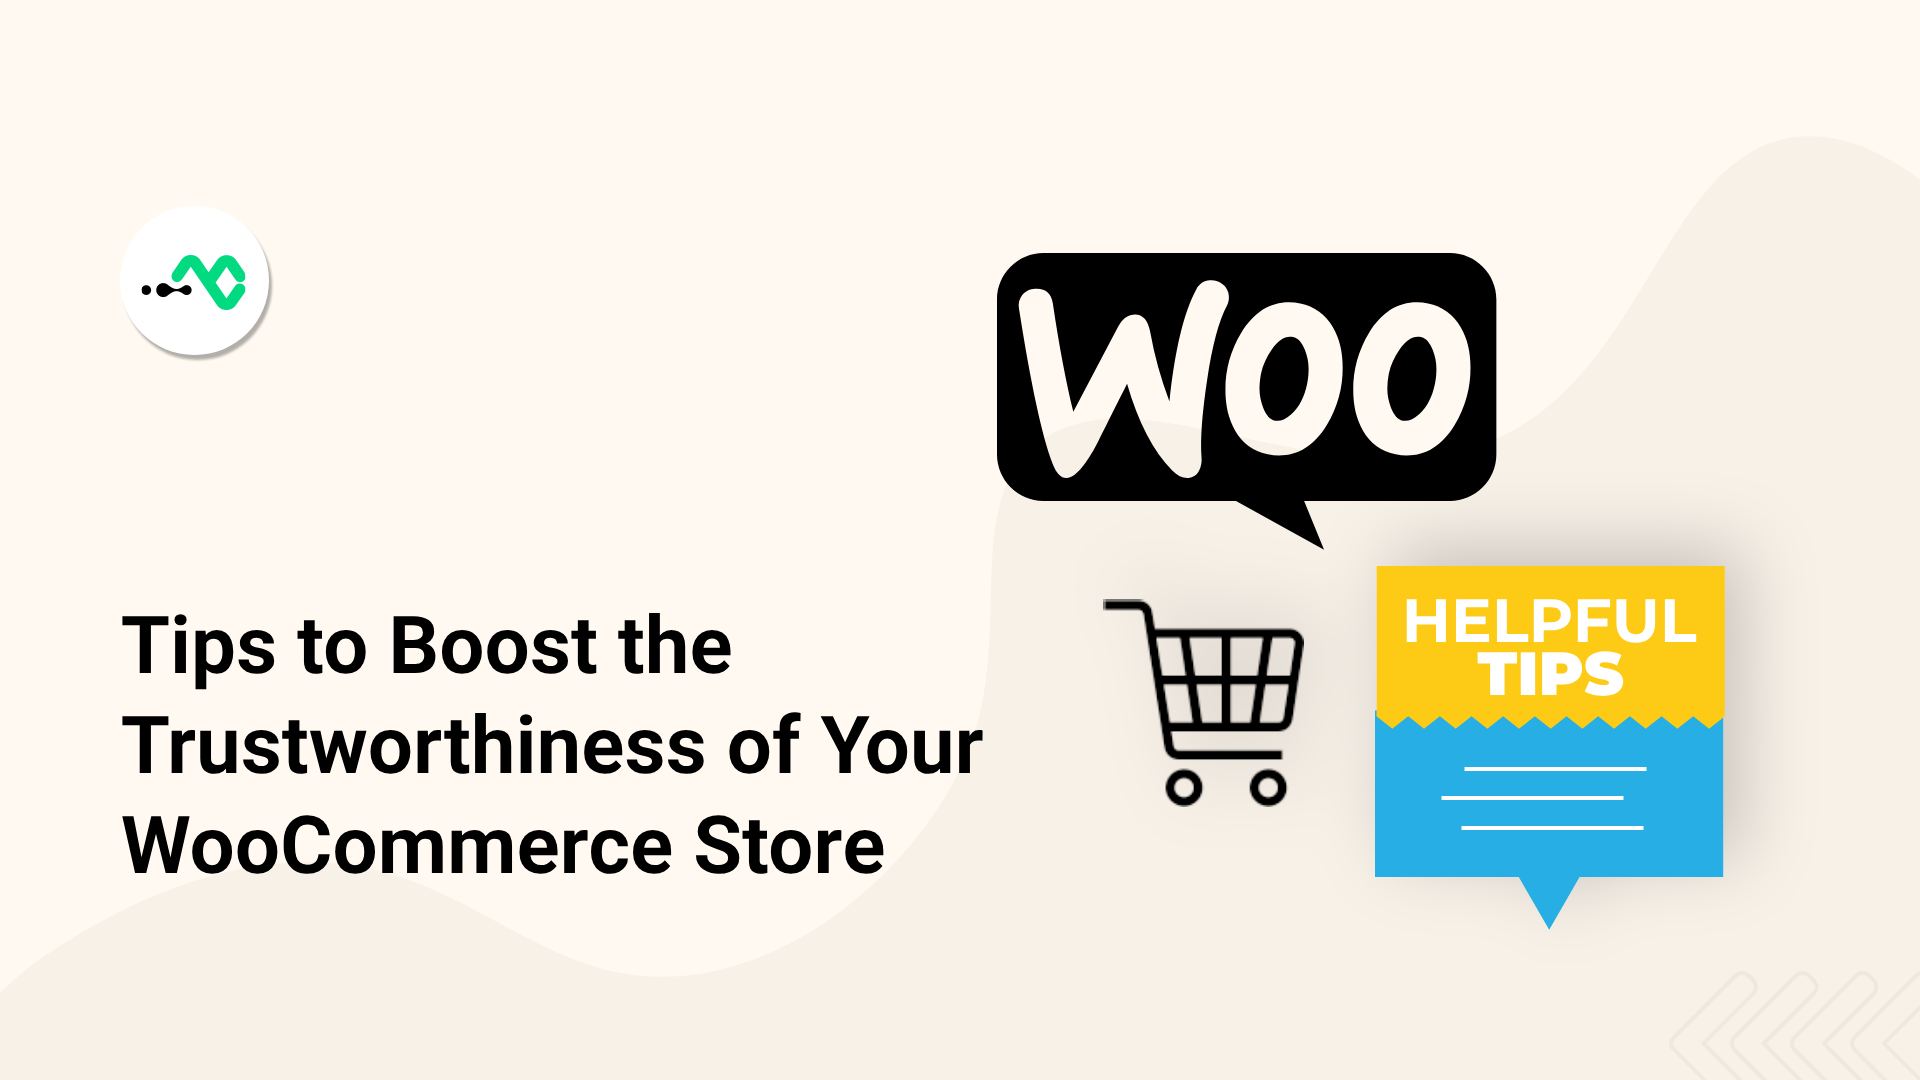 How to make a WooCommerce website more trustworthy